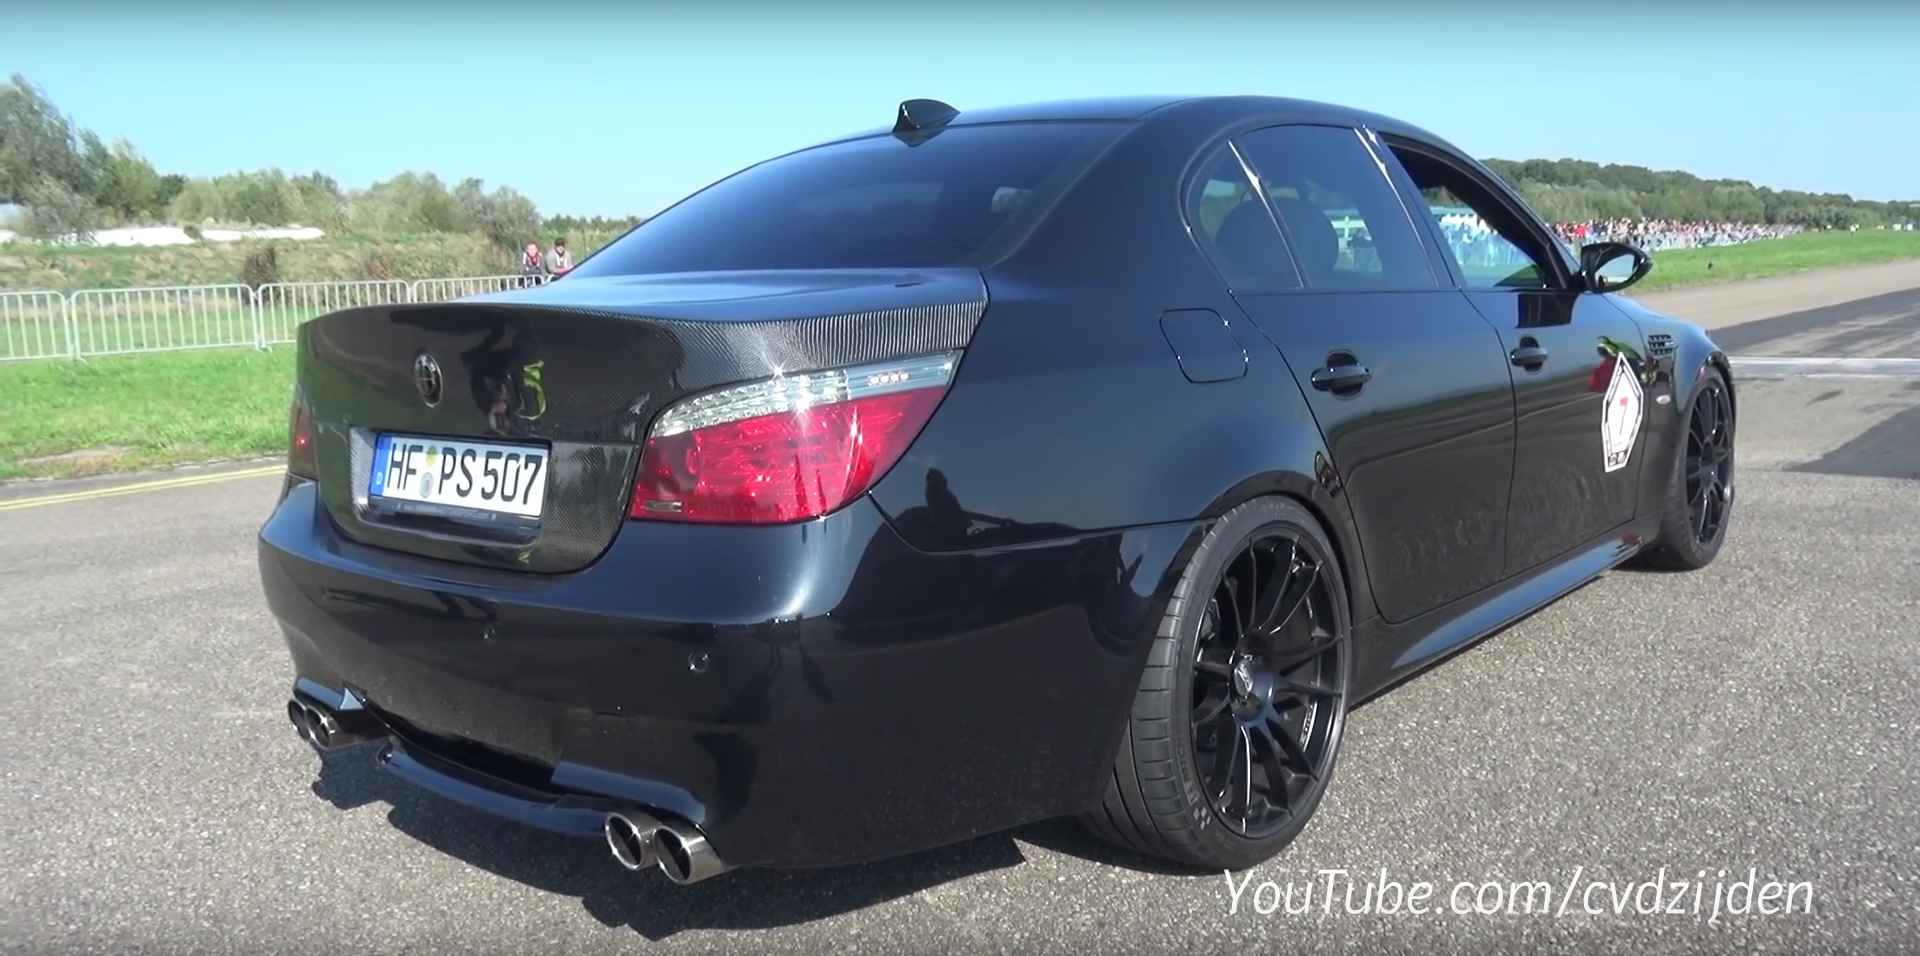 This BMW E60 M5 Has 630 HP Without a Supercharger or a Turbo - autoevolution